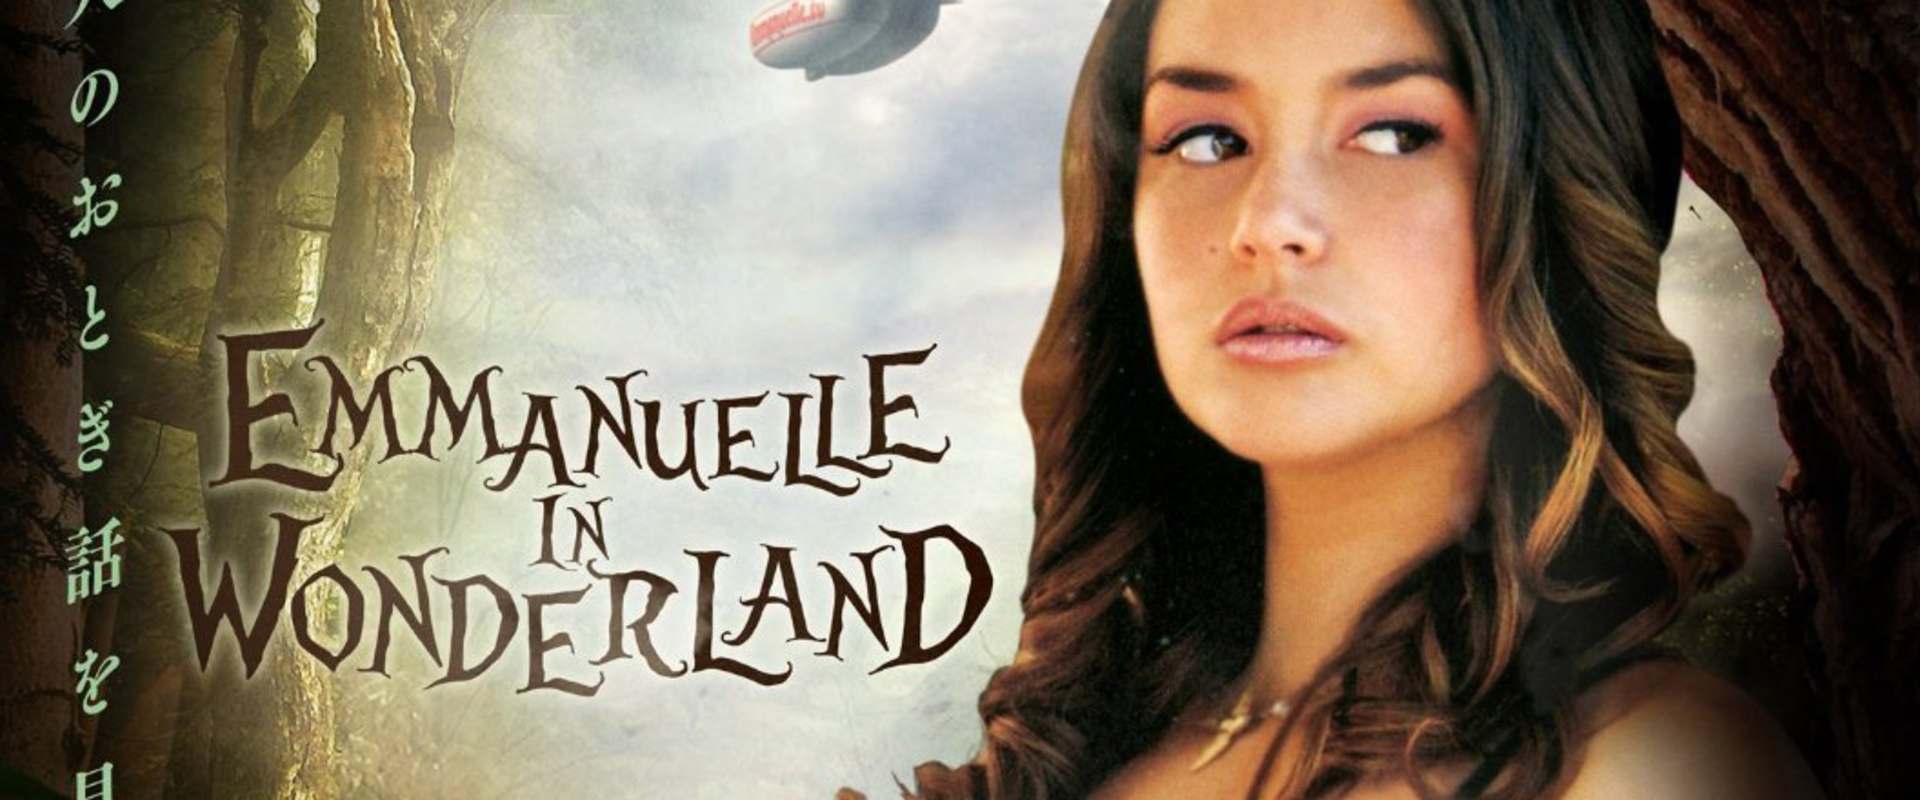 Watch Adventures Into the Woods: A Sexy Musical on Netflix ...
 Emmanuelle In Wonderland